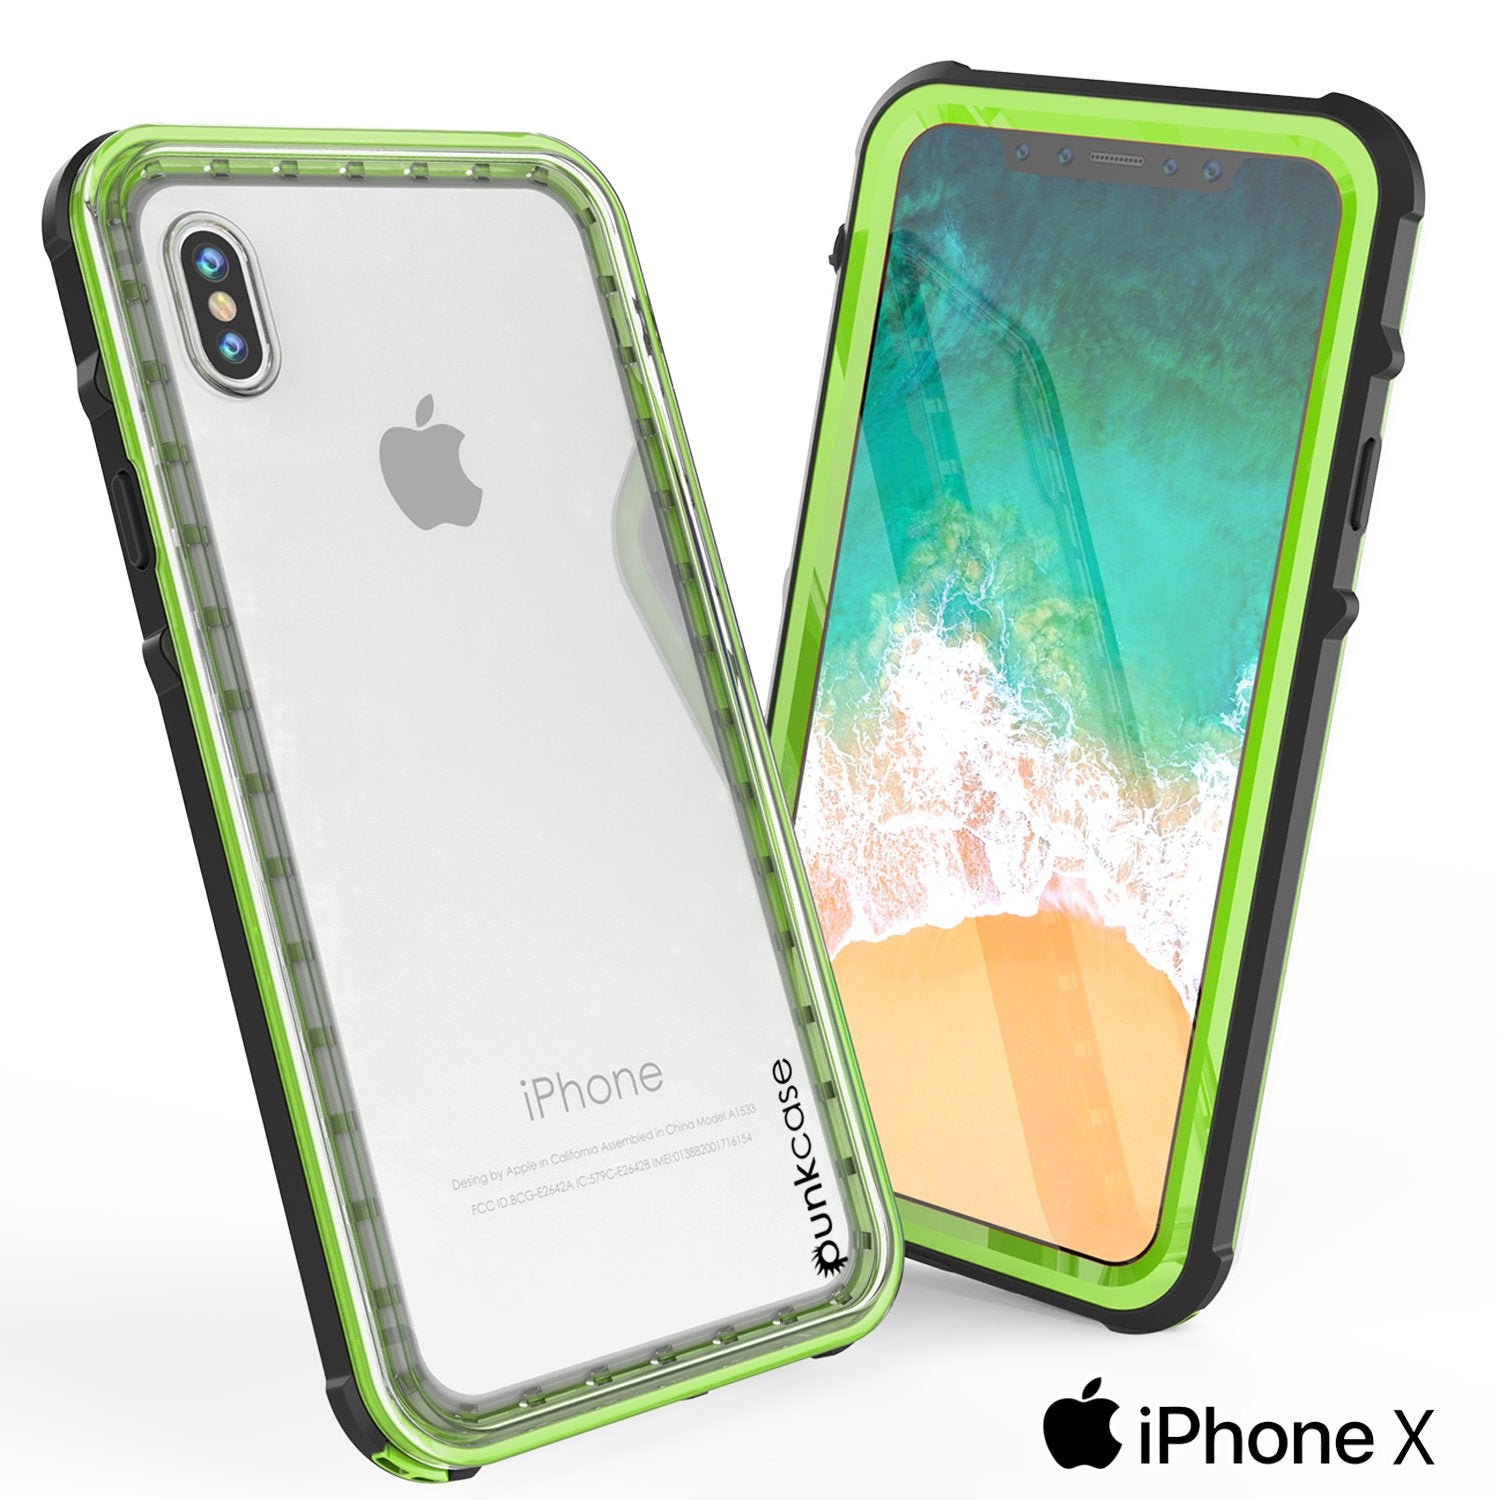 iPhone X Case, PUNKCase [CRYSTAL SERIES] Protective IP68 Certified Cover W/ Attached Screen Protector - DustPROOF, ShockPROOF, SnowPROOF - Ultra Slim Fit for Apple iPhone 10 [LIGHT GREEN]